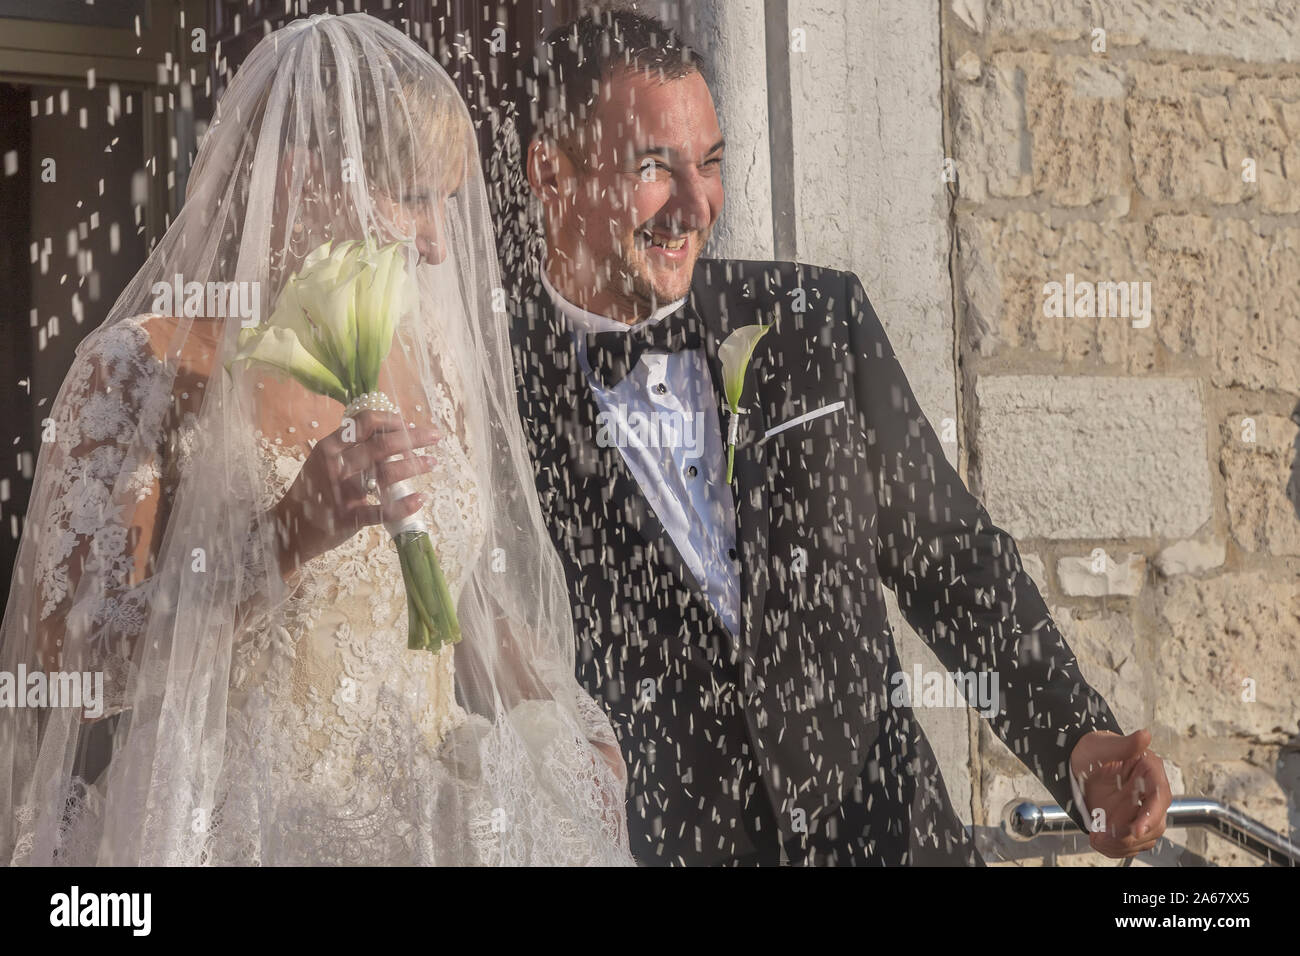 FAŽANA, CROATIA - OCTOBER 12, 2019: Unidentified smiling newlyweds on their way out of the church after the wedding ceremony, with the shower of under Stock Photo